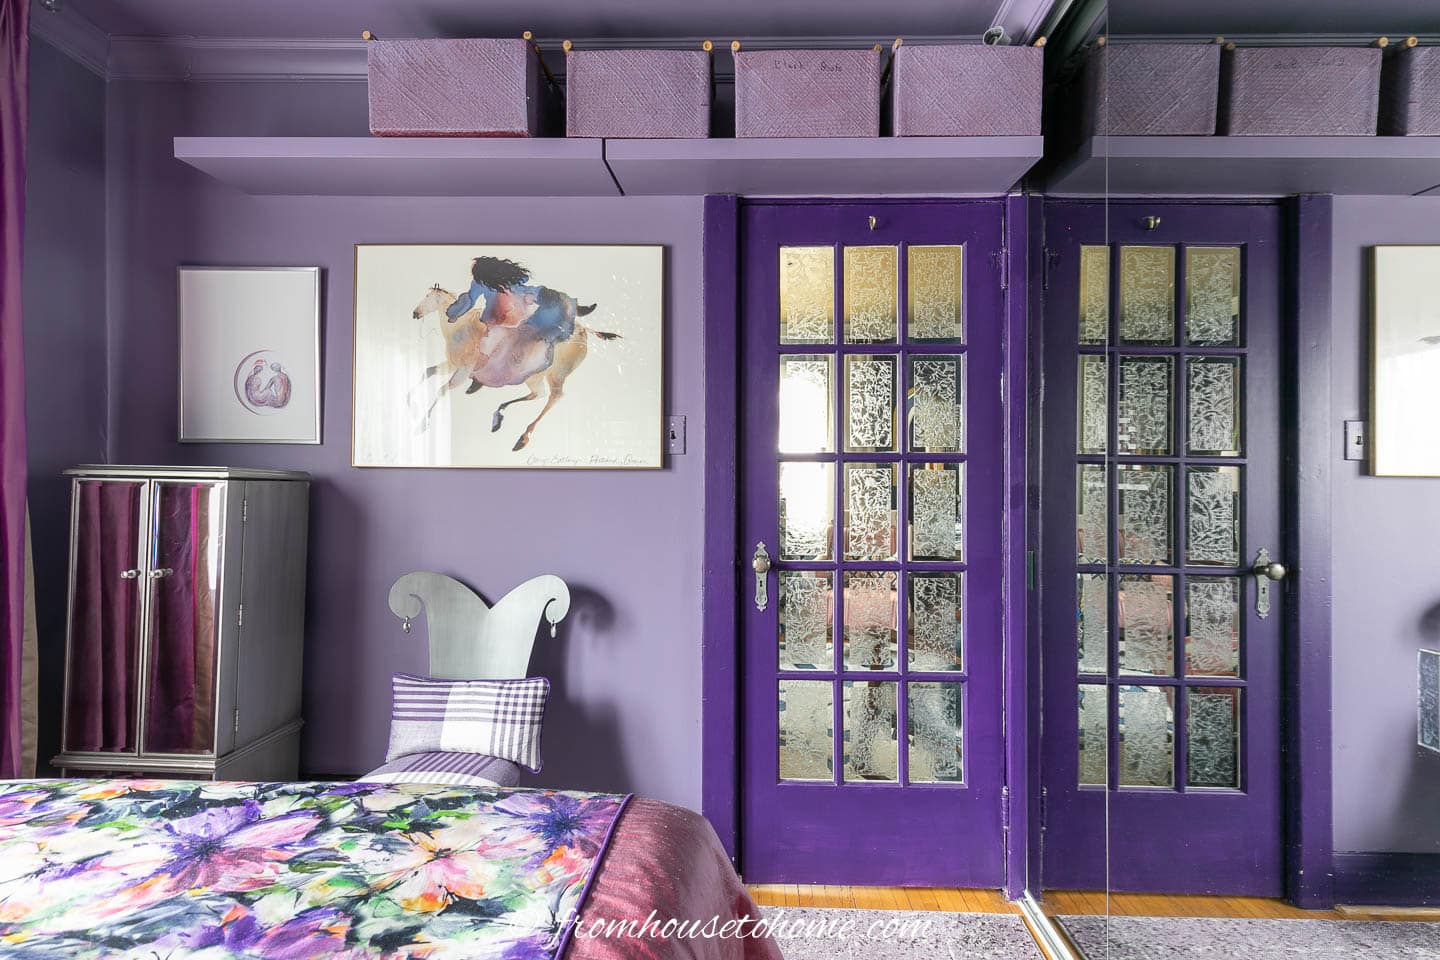 Bedroom wall painted in Sherwin Williams 'Mythical' with trim in Sherwin Williams 'Dewberry'